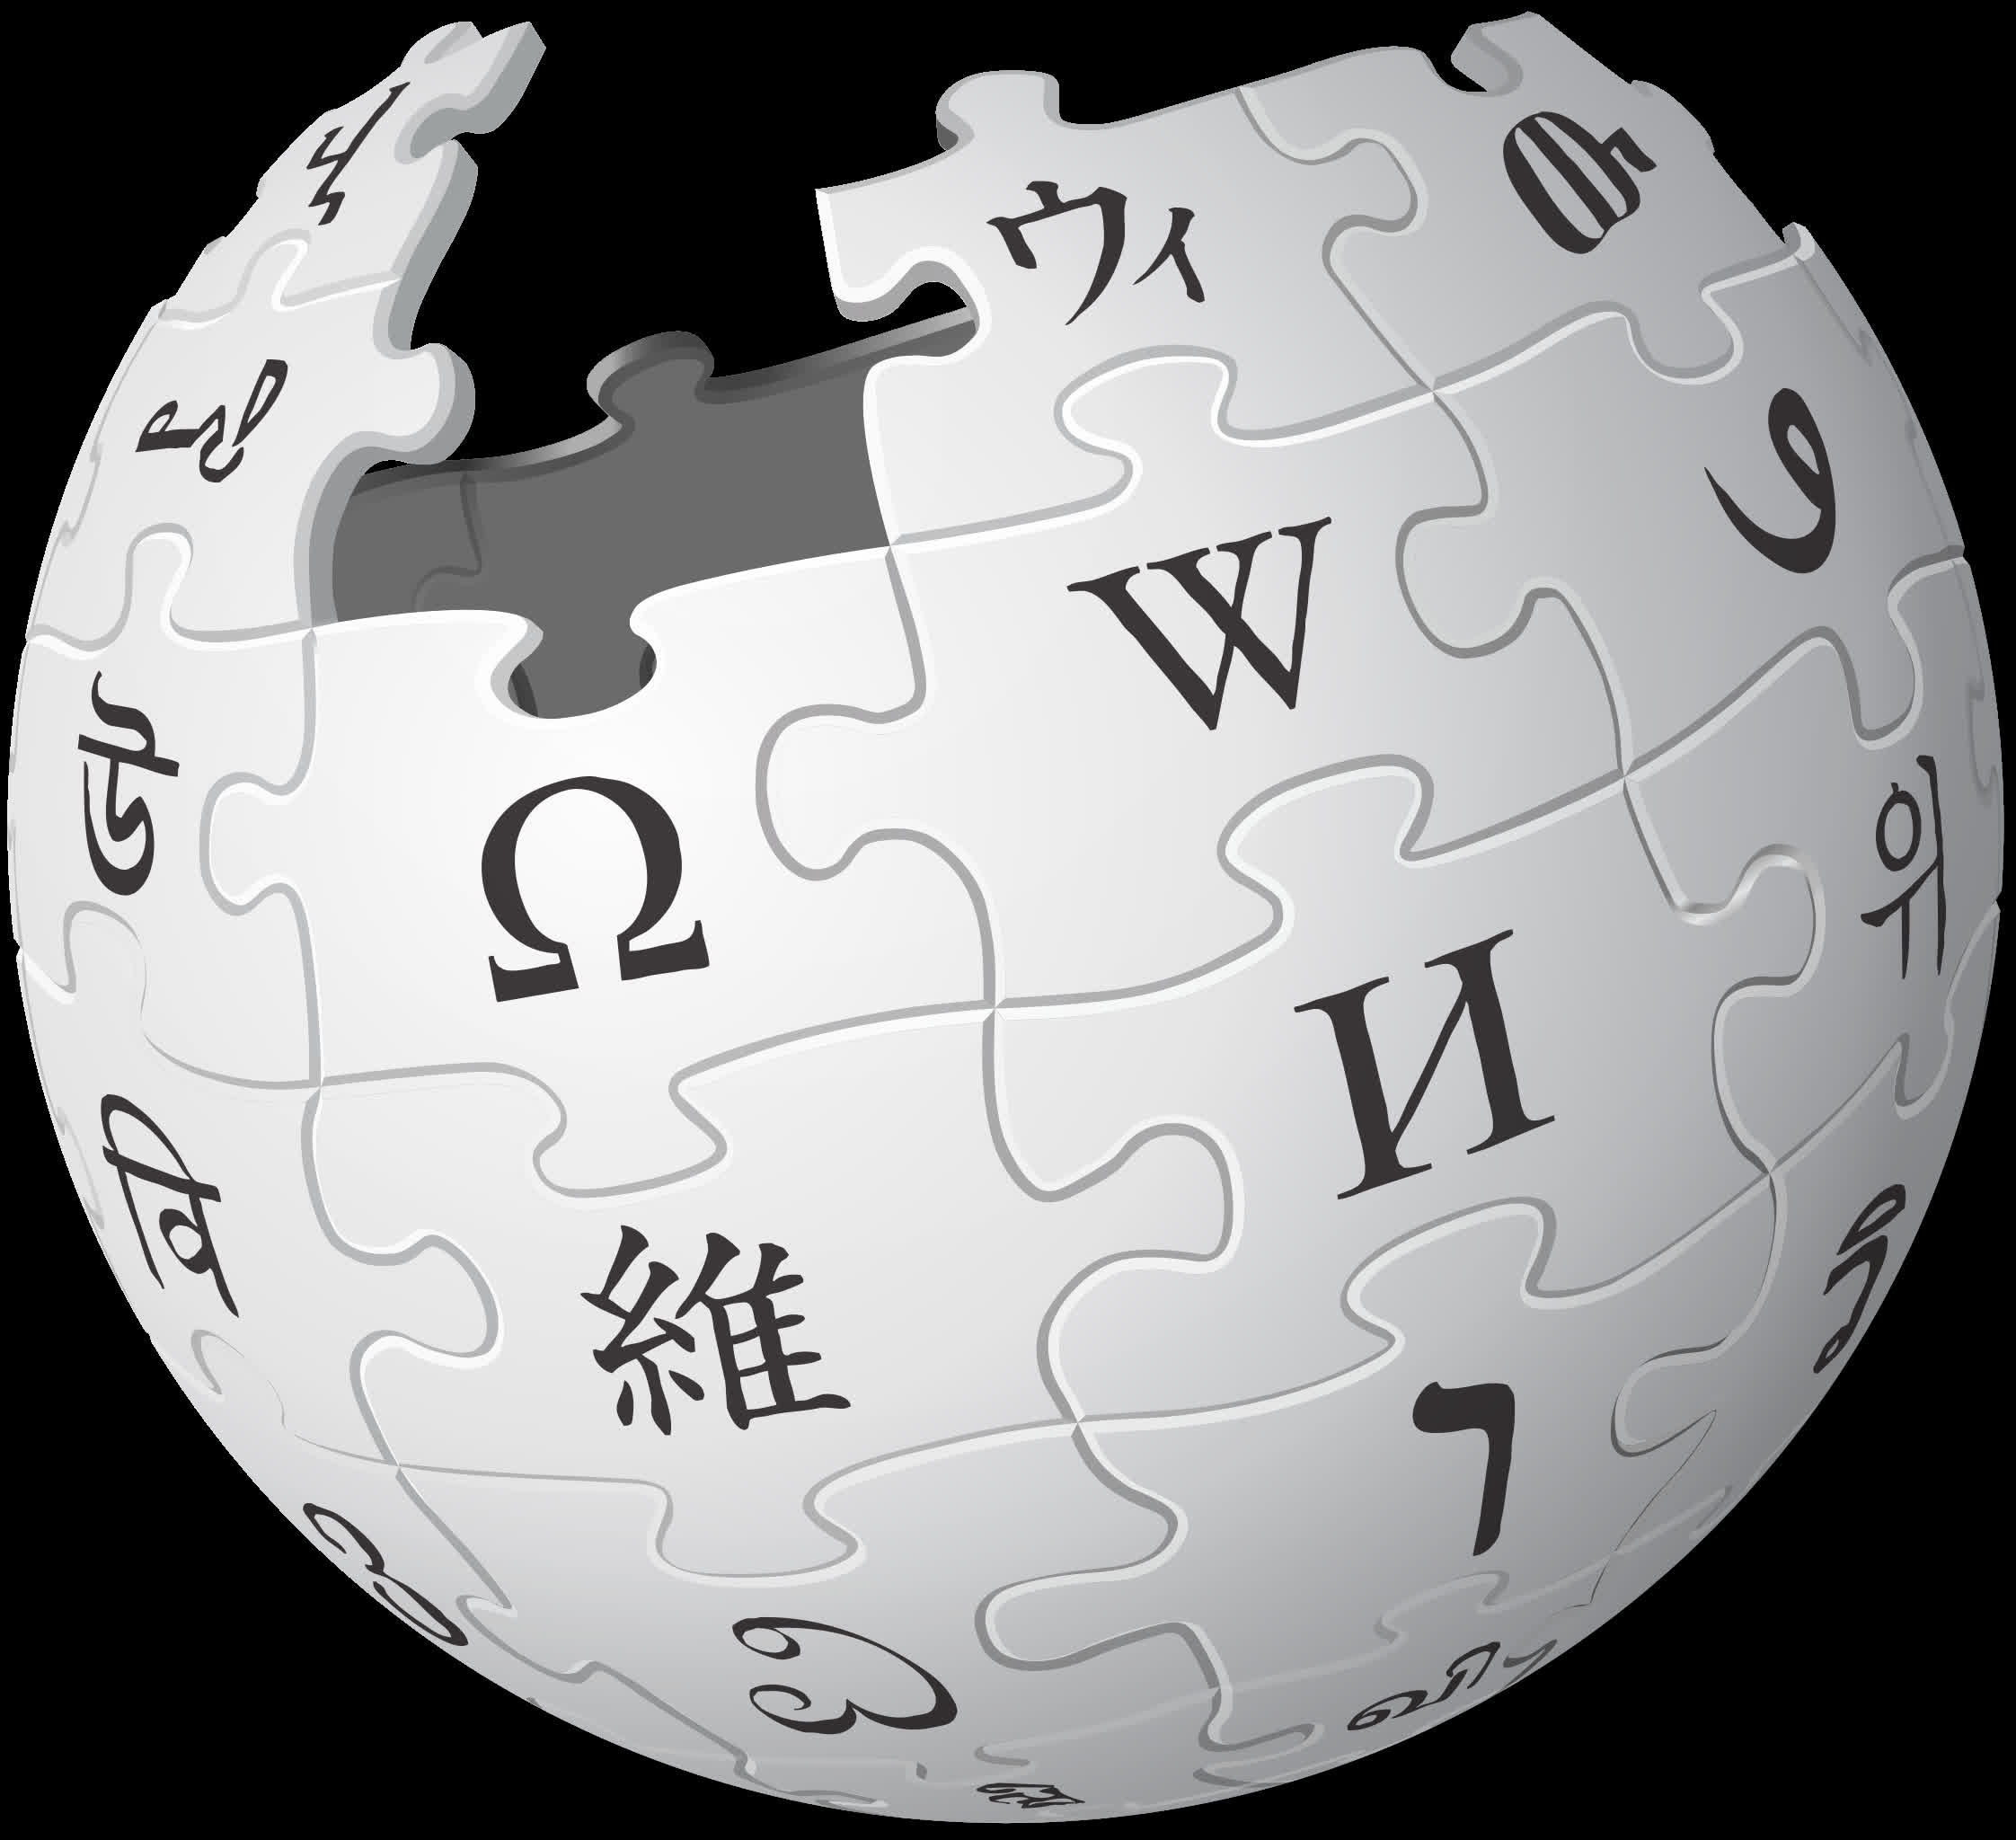 New Wikipedia design improves access to the world's knowledge